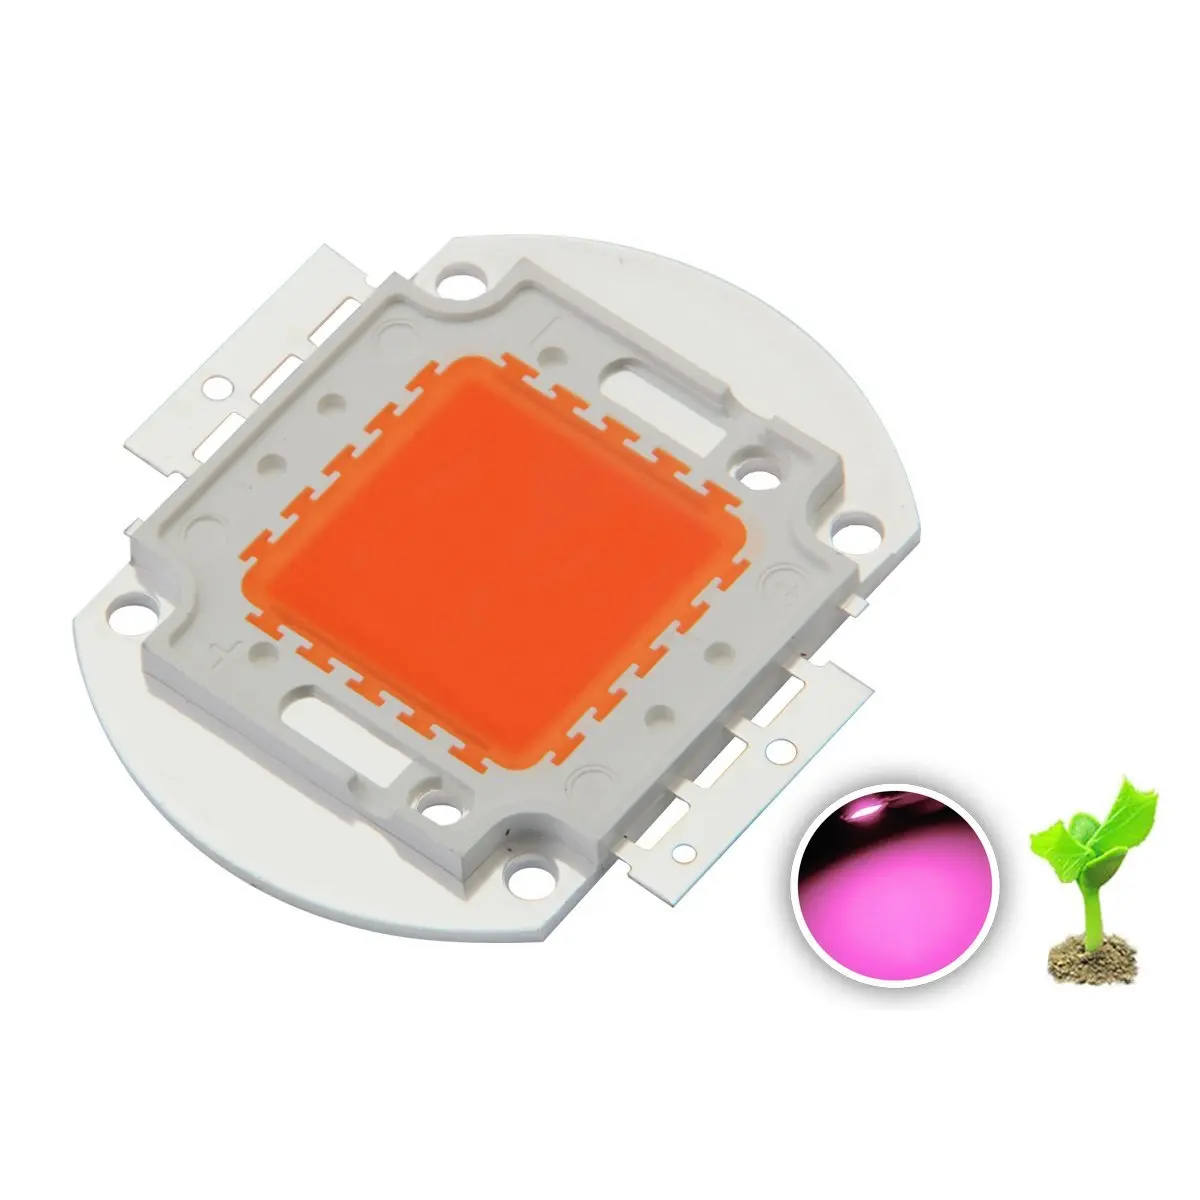 

2PCS 30W LED Grow light chip Epistar full spectrum 380-840nm 30W led grow light array for indoor DIY growth and bloom